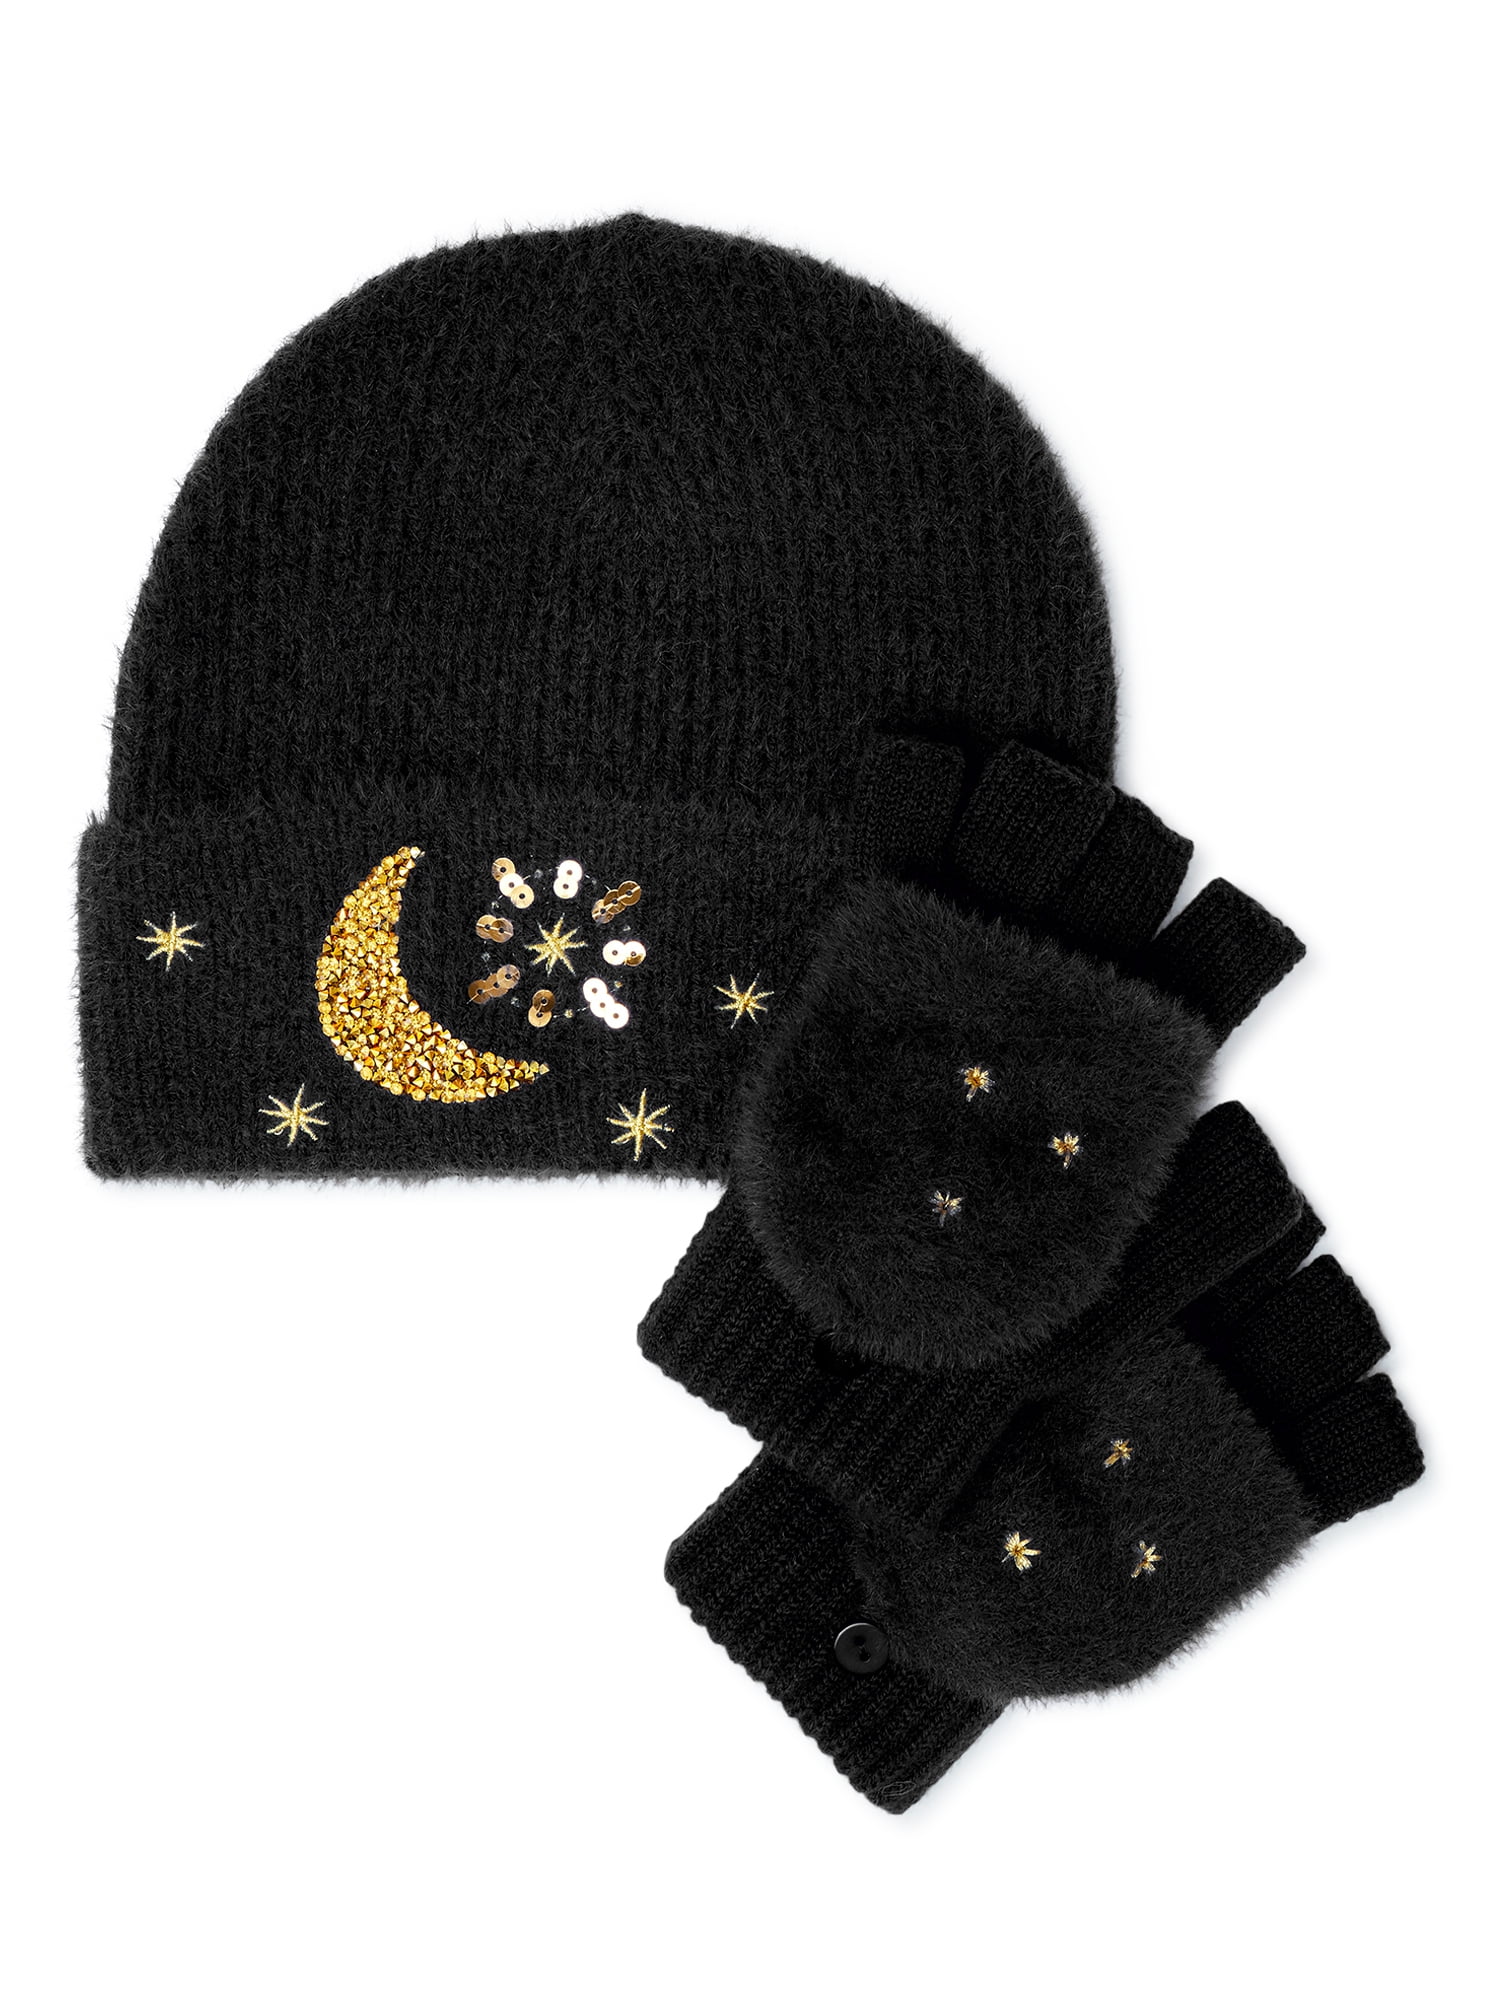 Generic Girls Celestial Hat and Gloves Set, 2-Piece